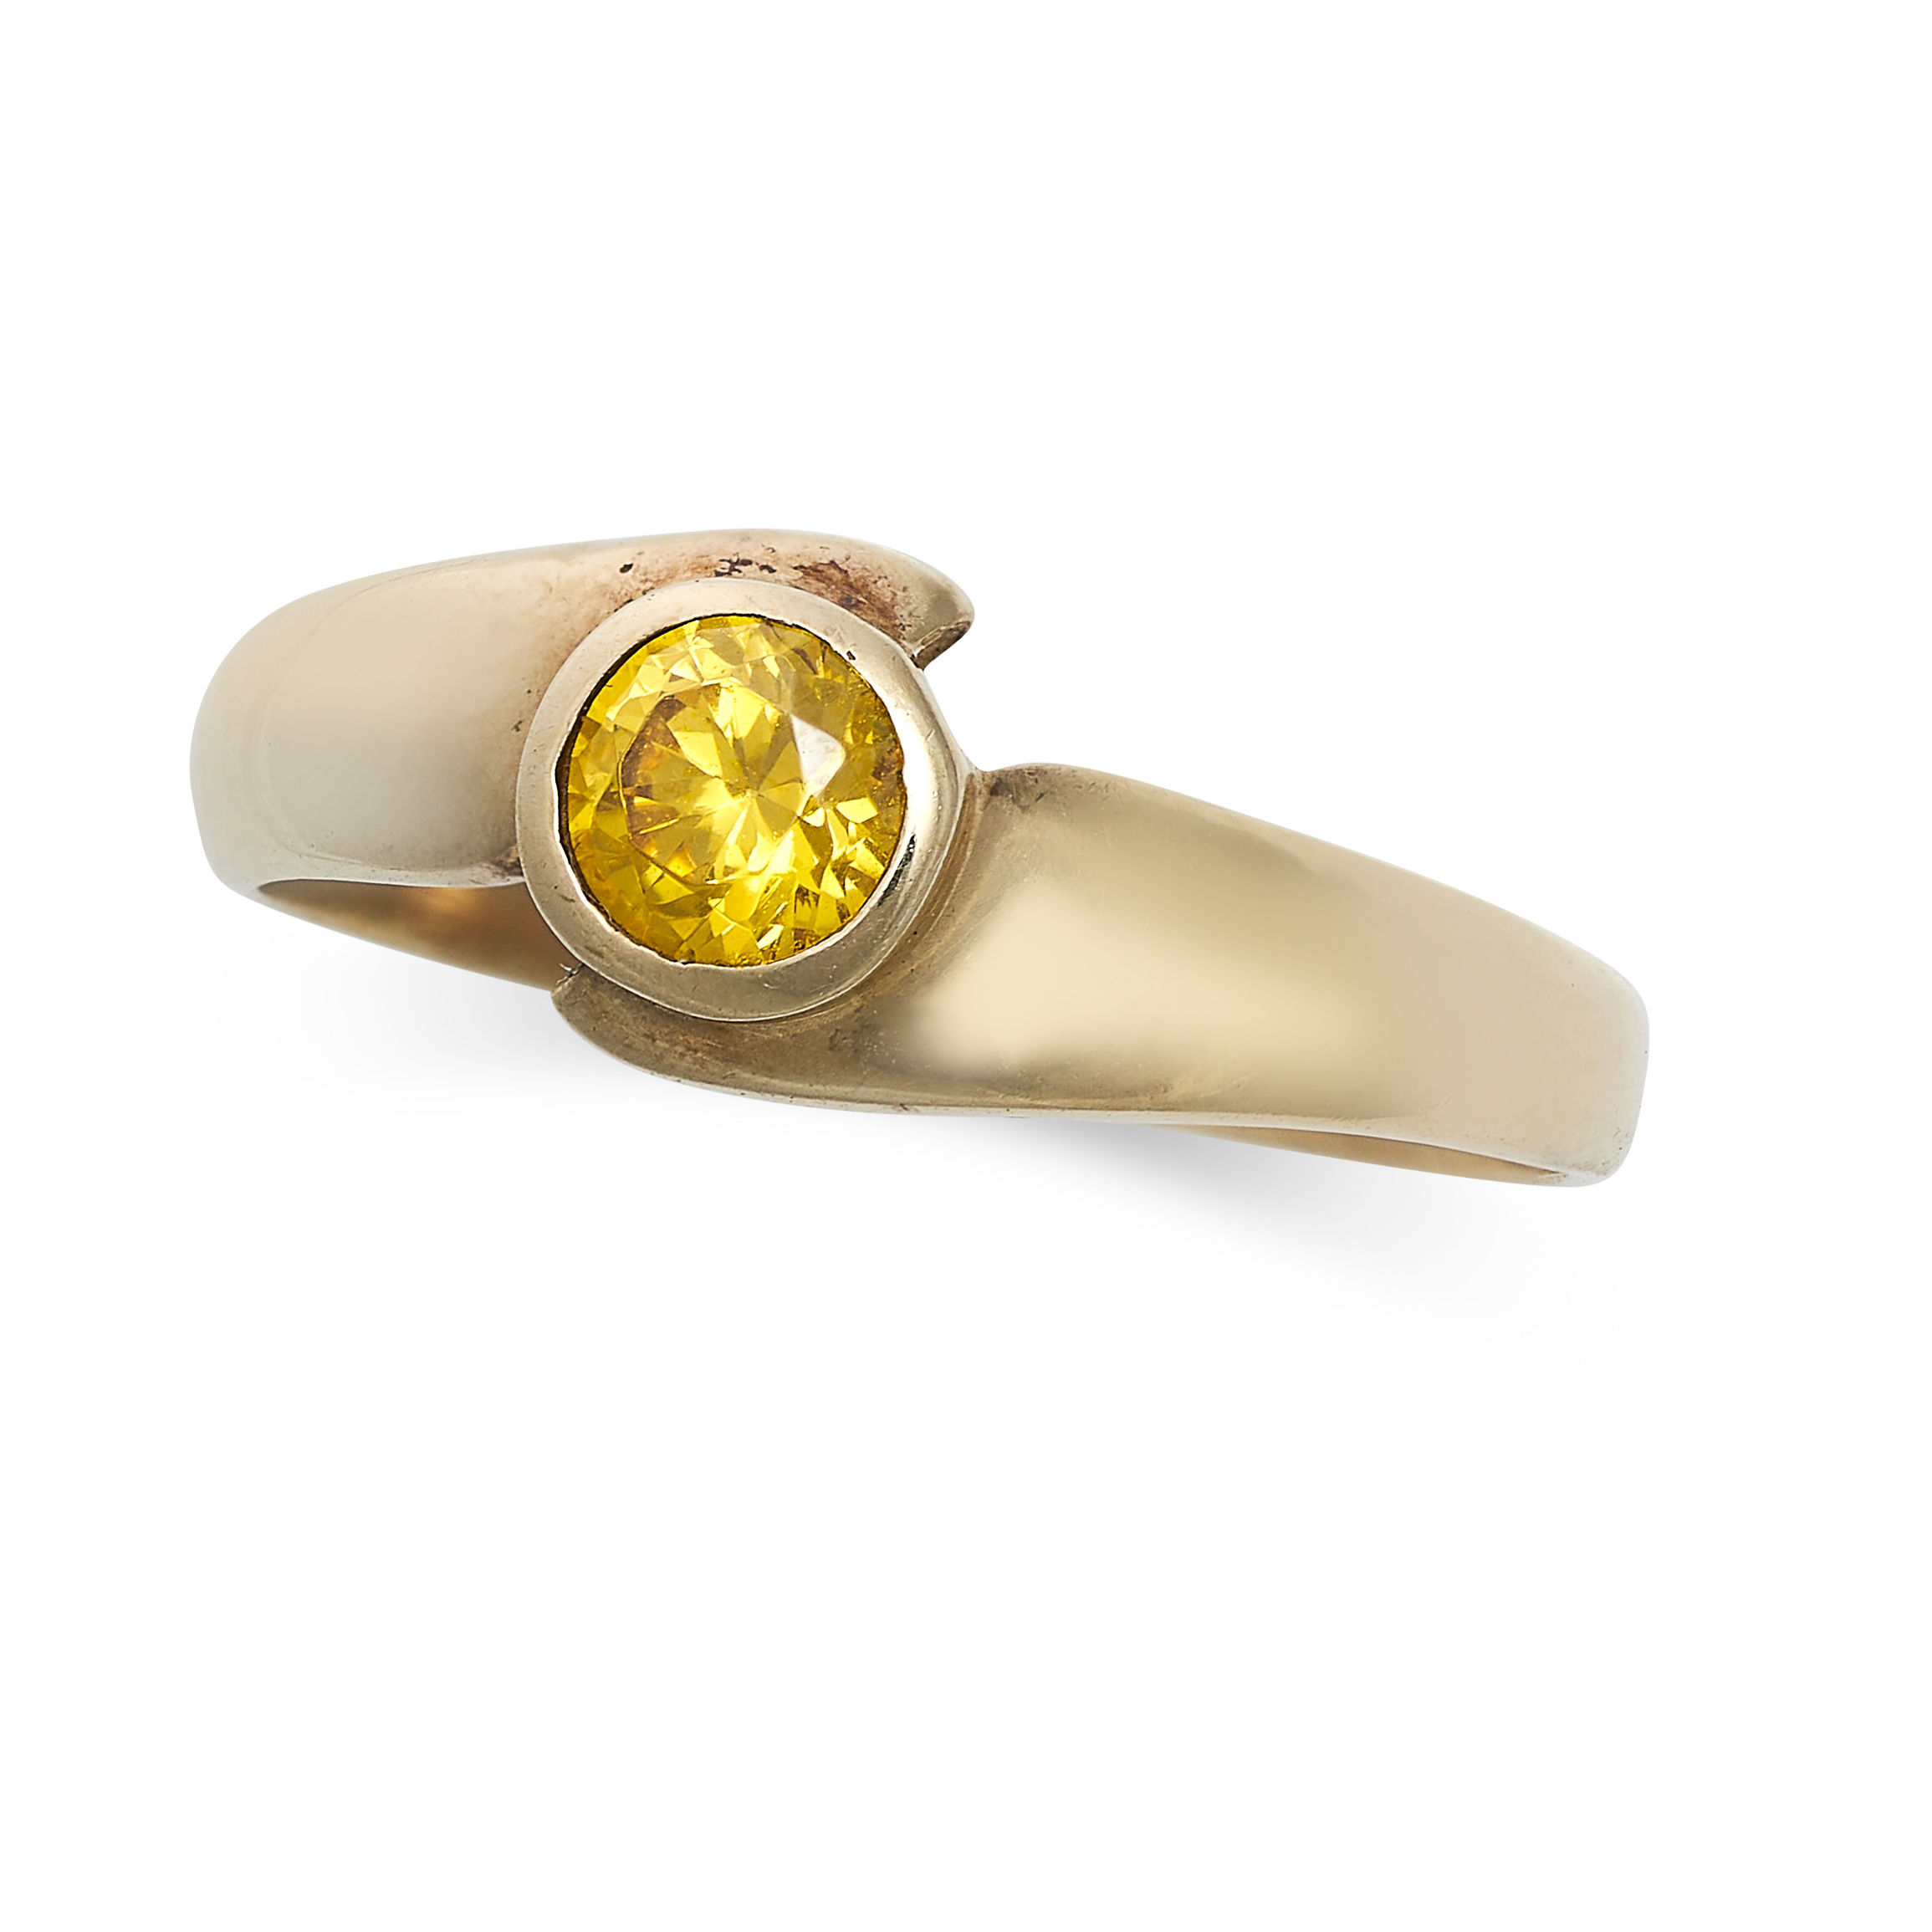 A YELLOW PASTE RING in 9ct yellow gold, set with a round cut yellow paste gemstone, British